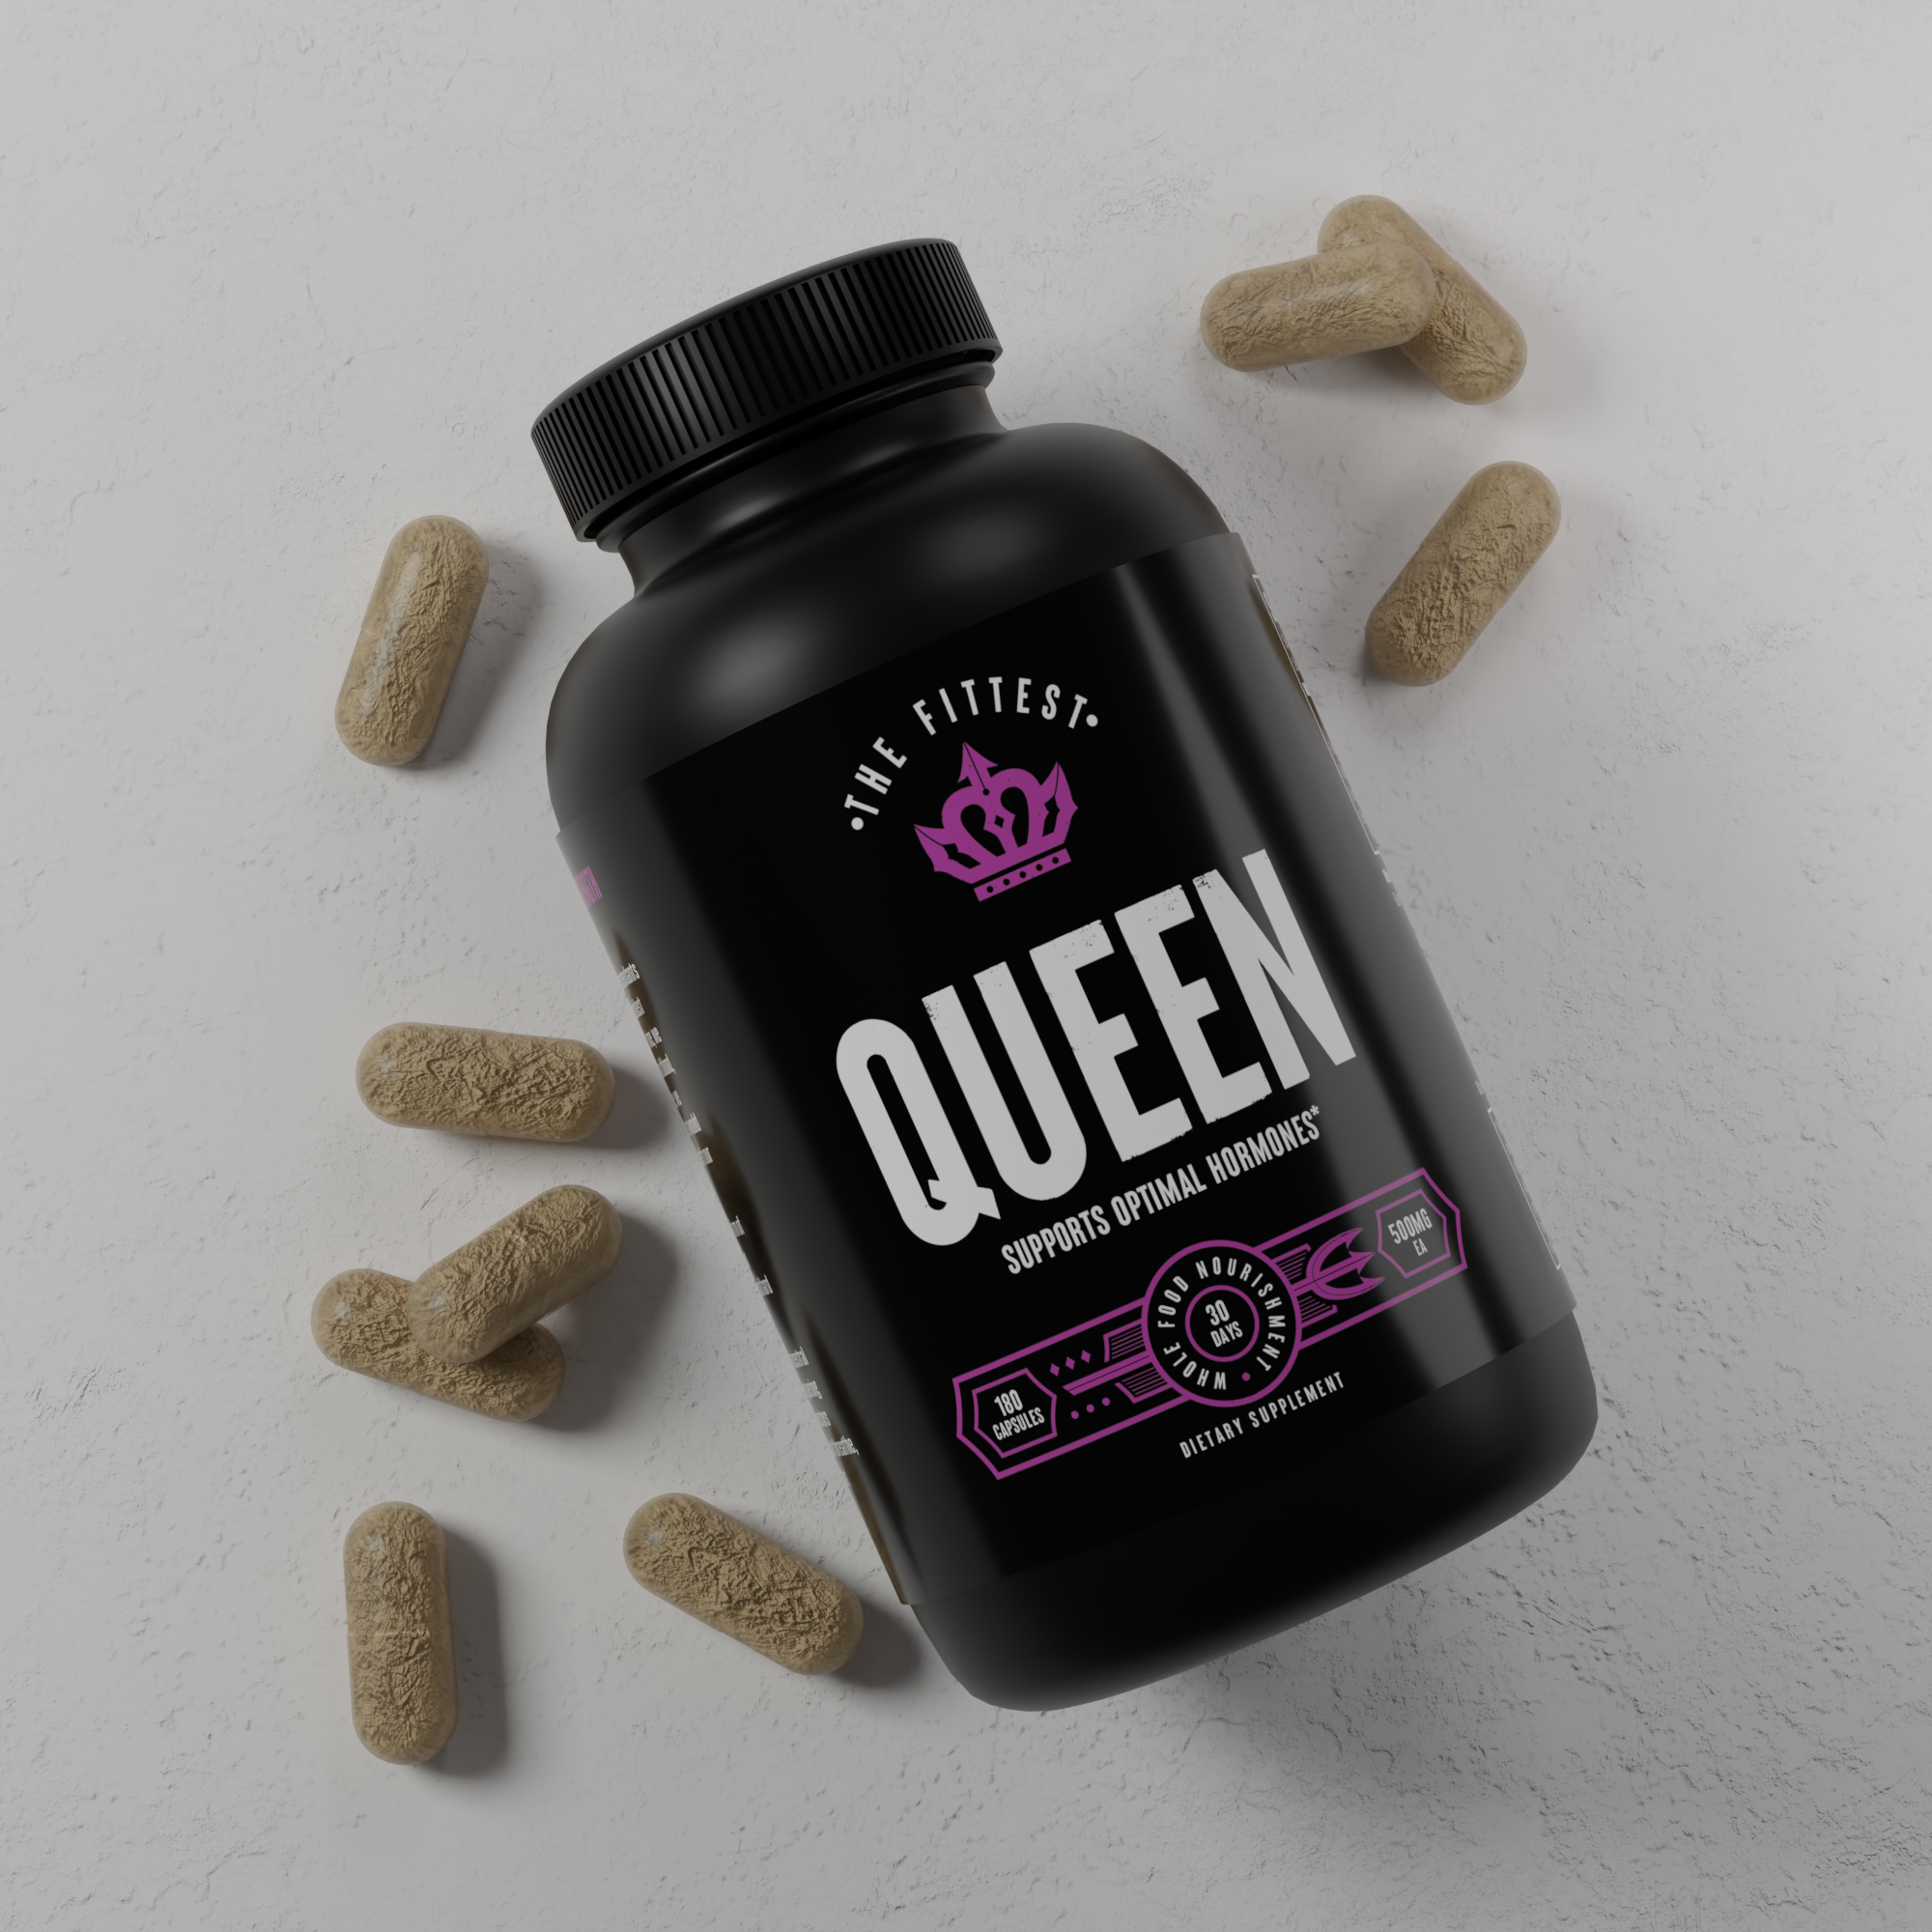 Bottle of queen laying on top of capsules which have spilled out of the bottle on a table